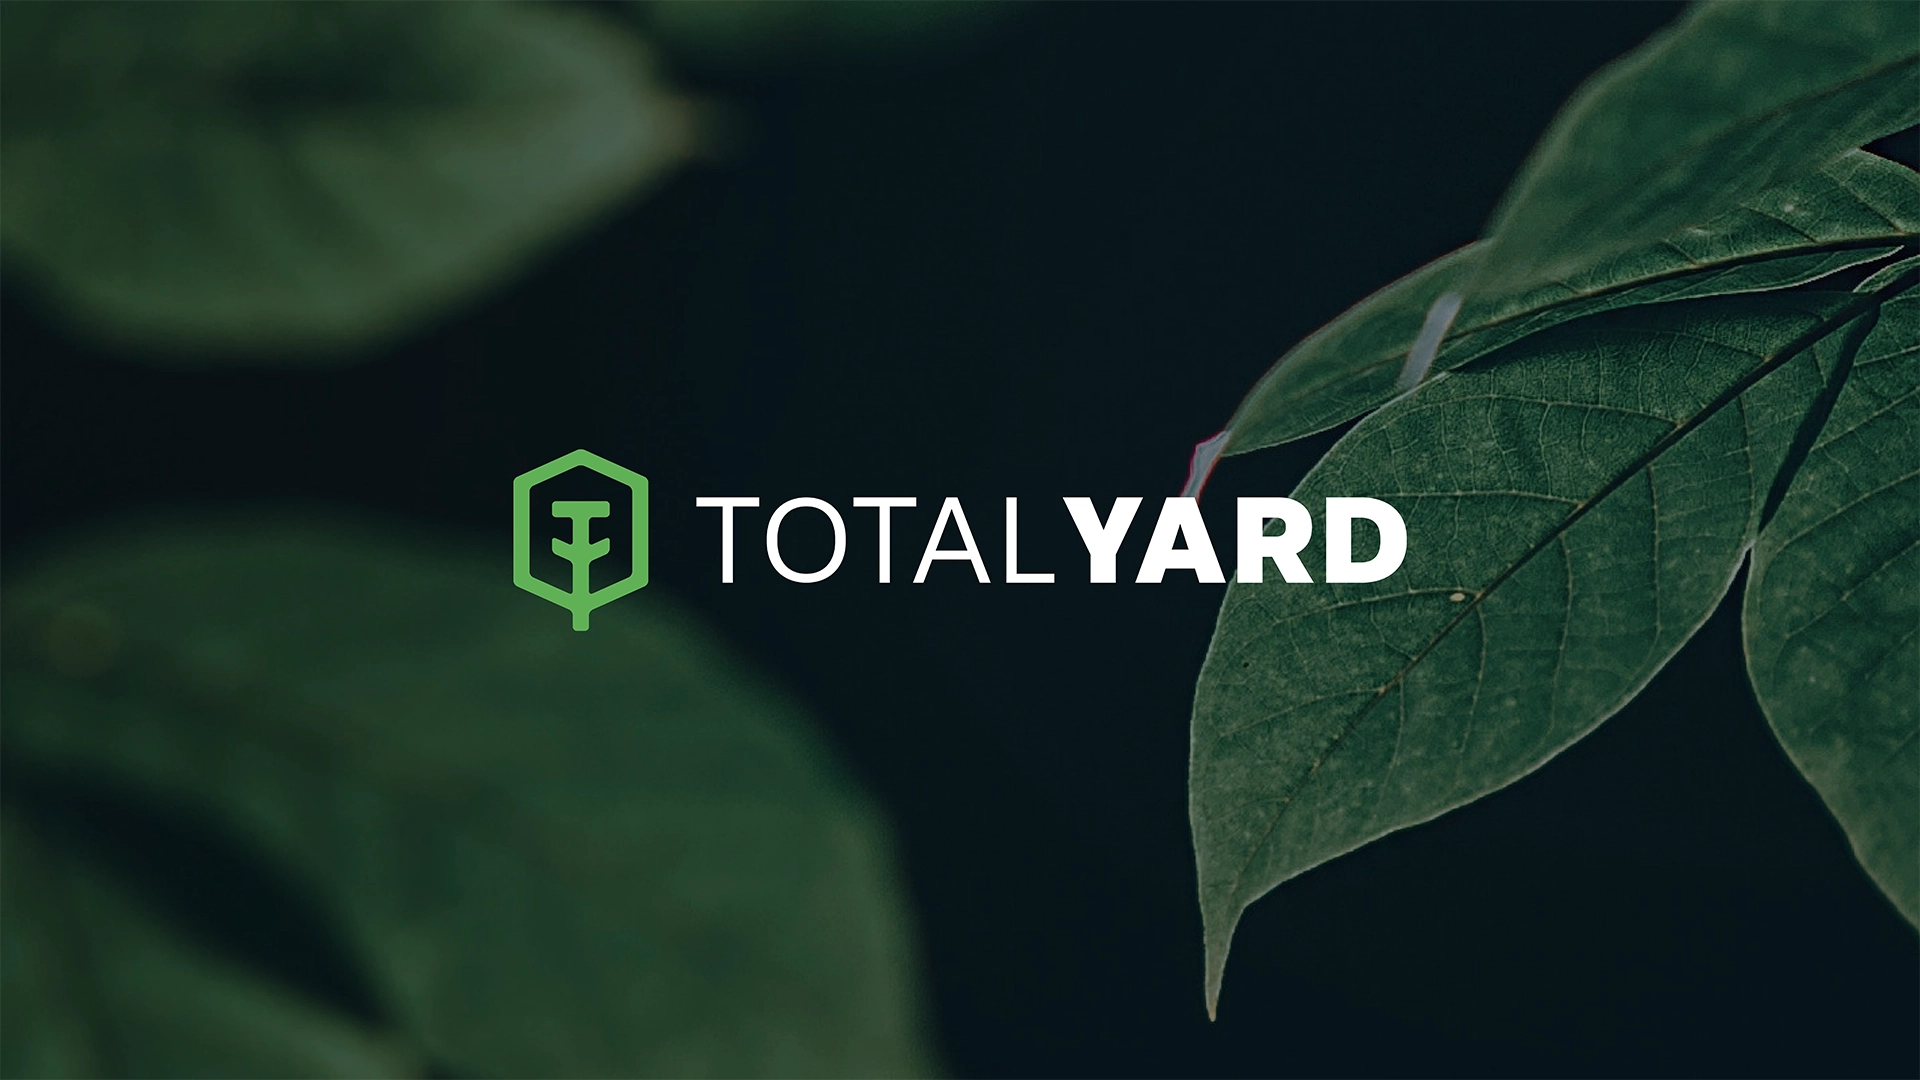 Total Yard's visual identity project case study